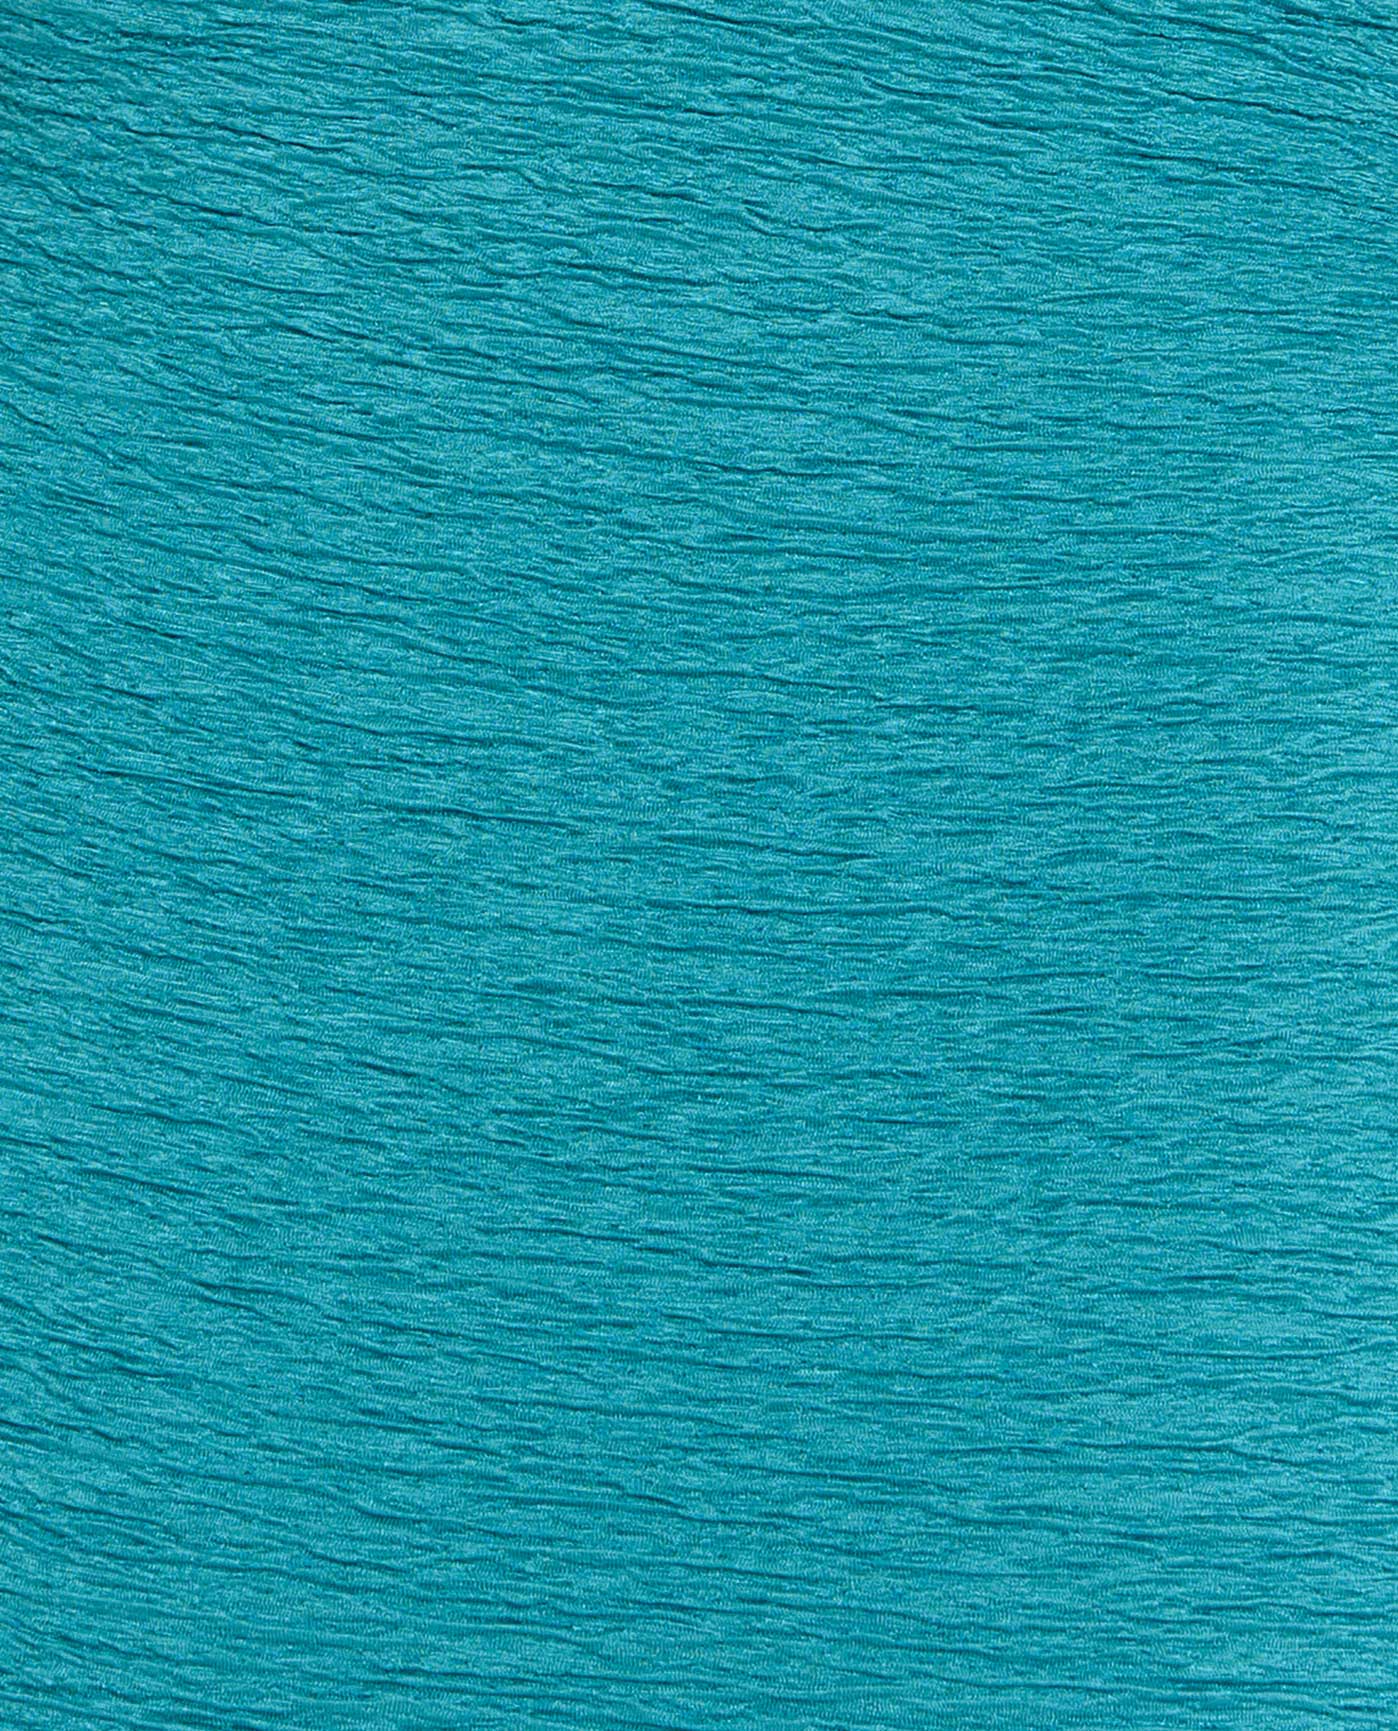 FABRIC SWATCH VIEW OF CHLORINE RESISTANT KRINKLE TEXTURED SOLID CROSS BACK D-CUP ONE PIECE | KRINKLE ARUBA